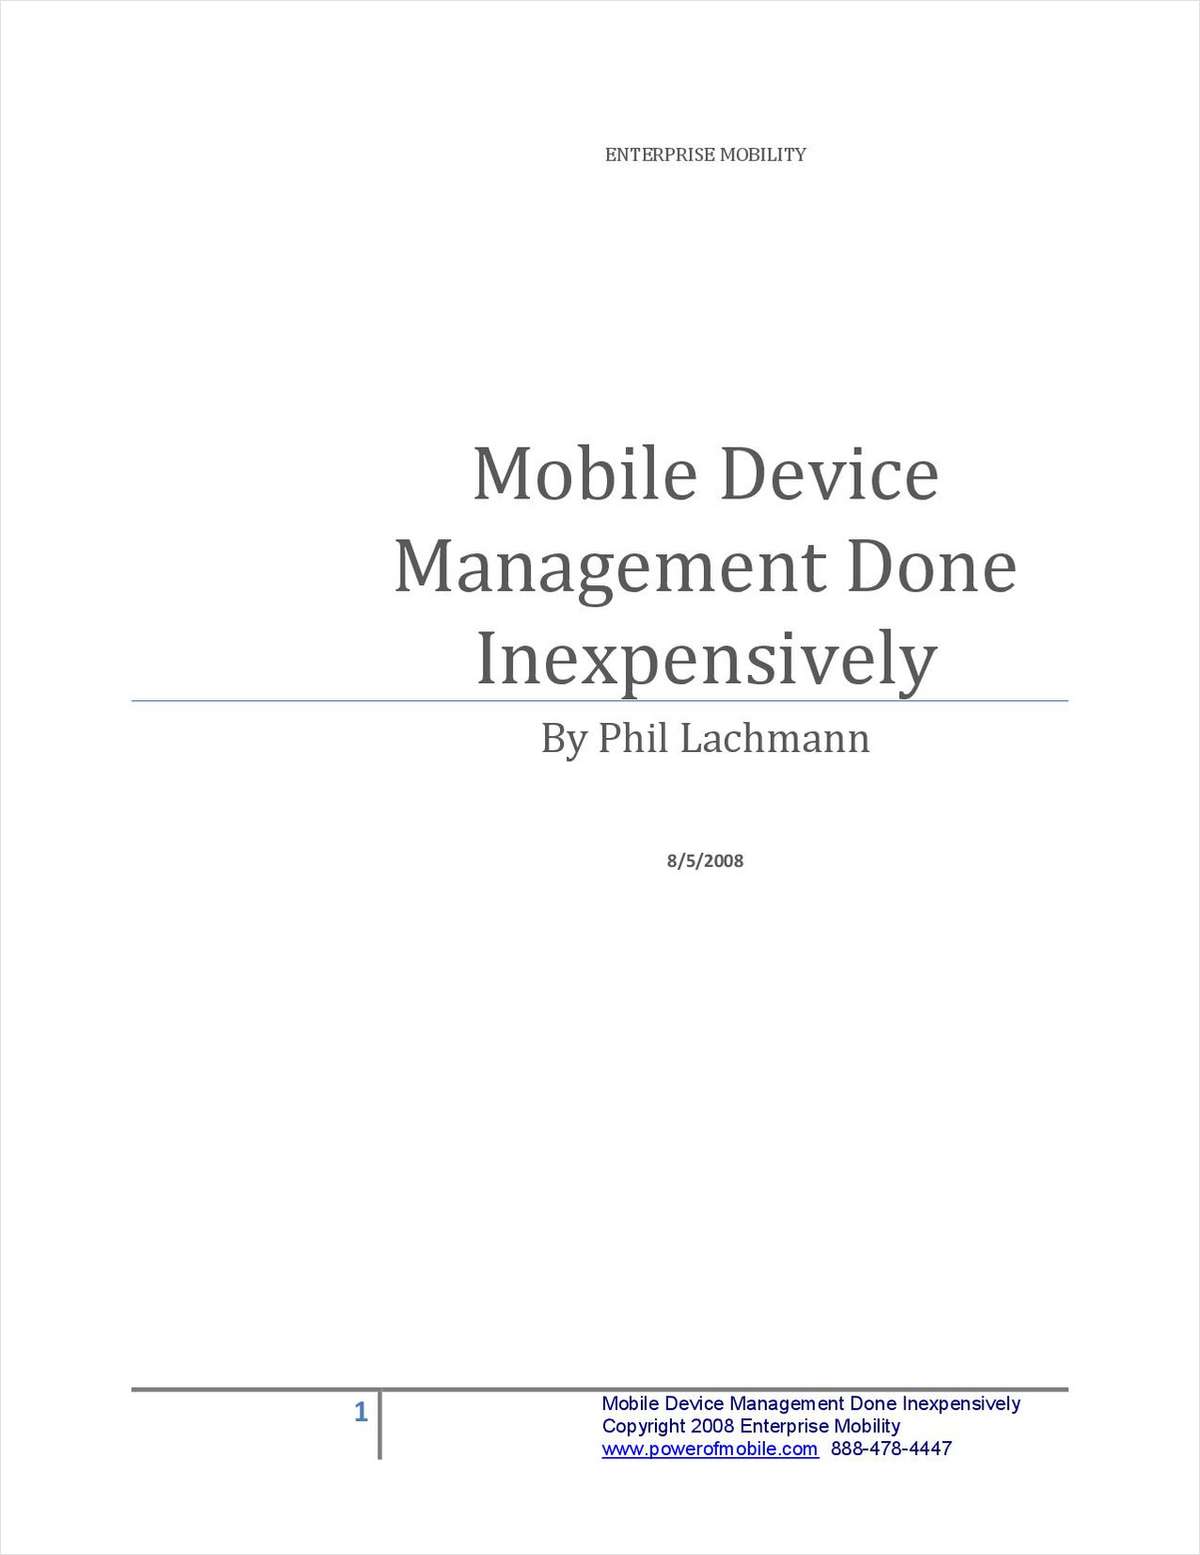 Mobile Device Management Done Inexpensively